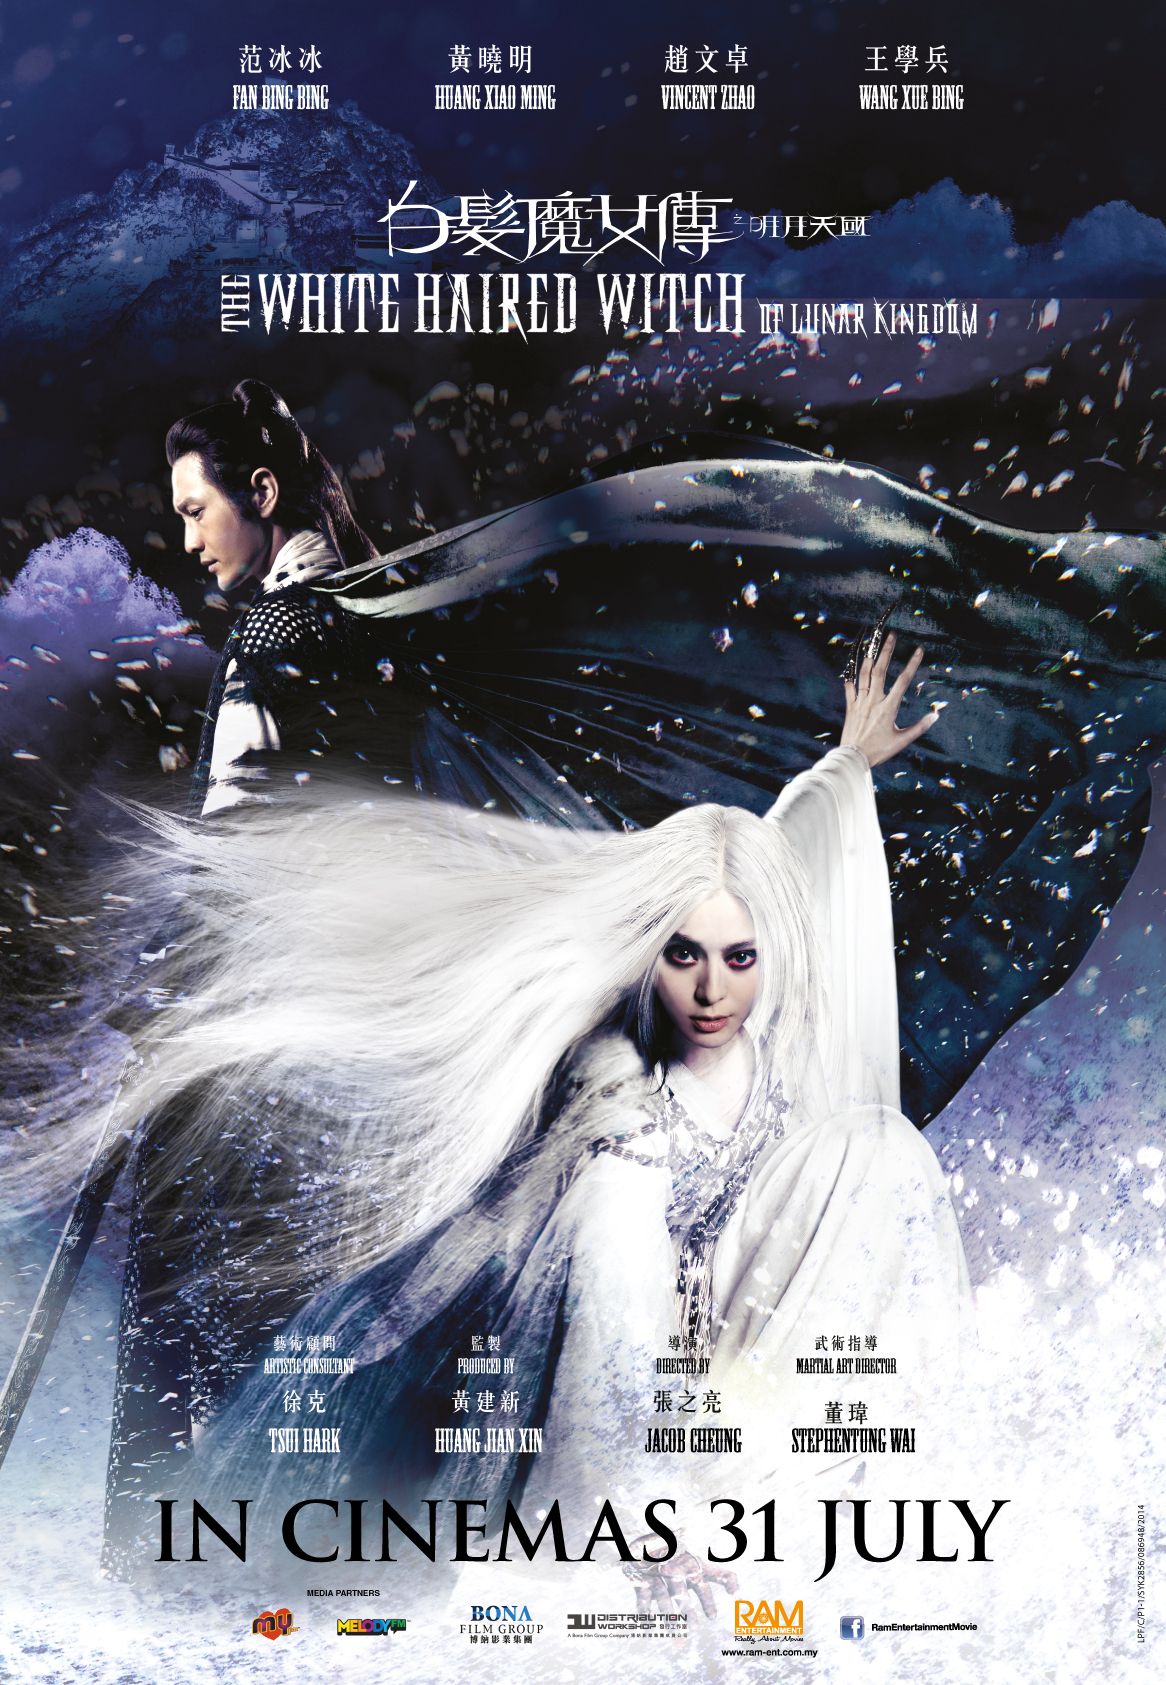 The White Haired Witch Of Lunar Kingdom <br>白发魔女传之明月天国 <br> 31 July